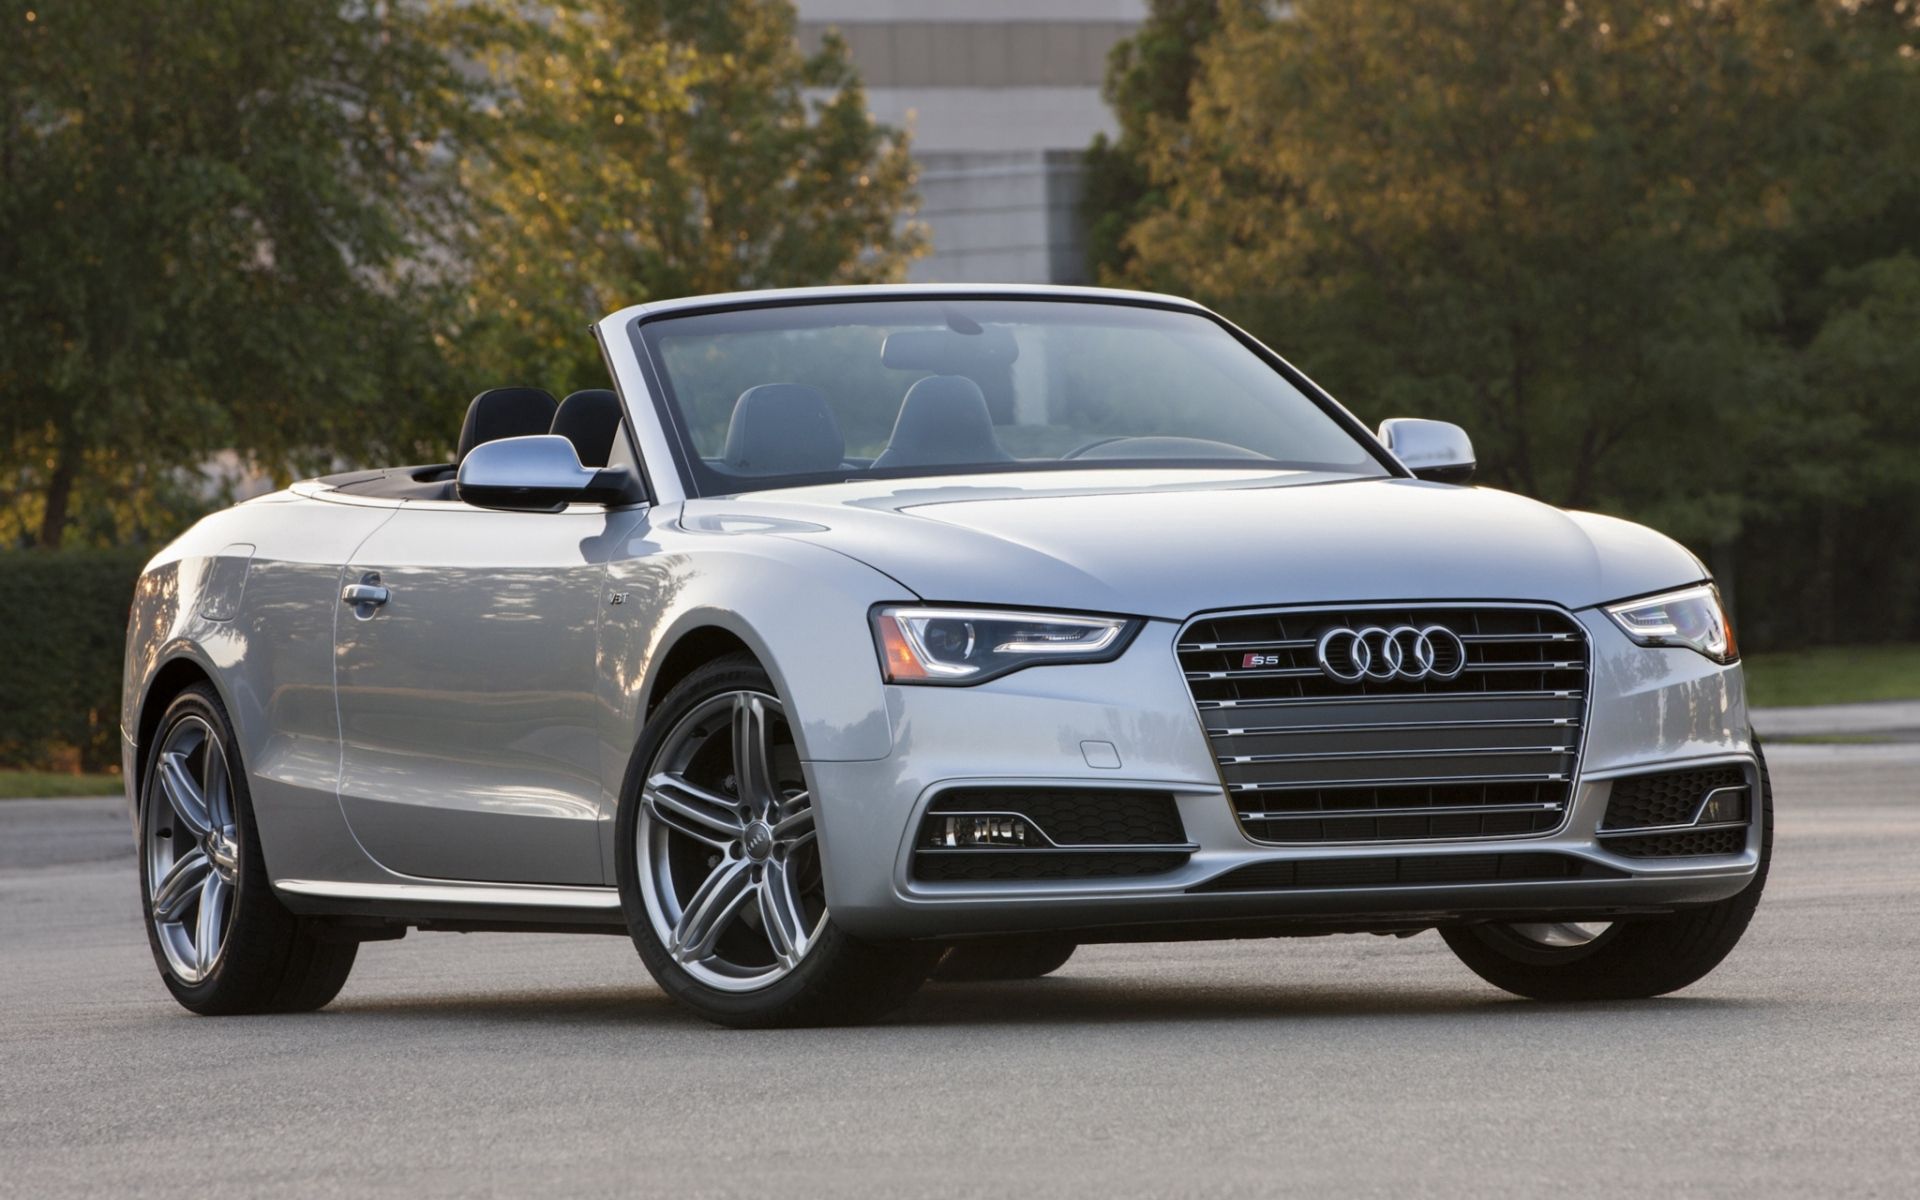 front view, audi, cars, grey, cabriolet, s5